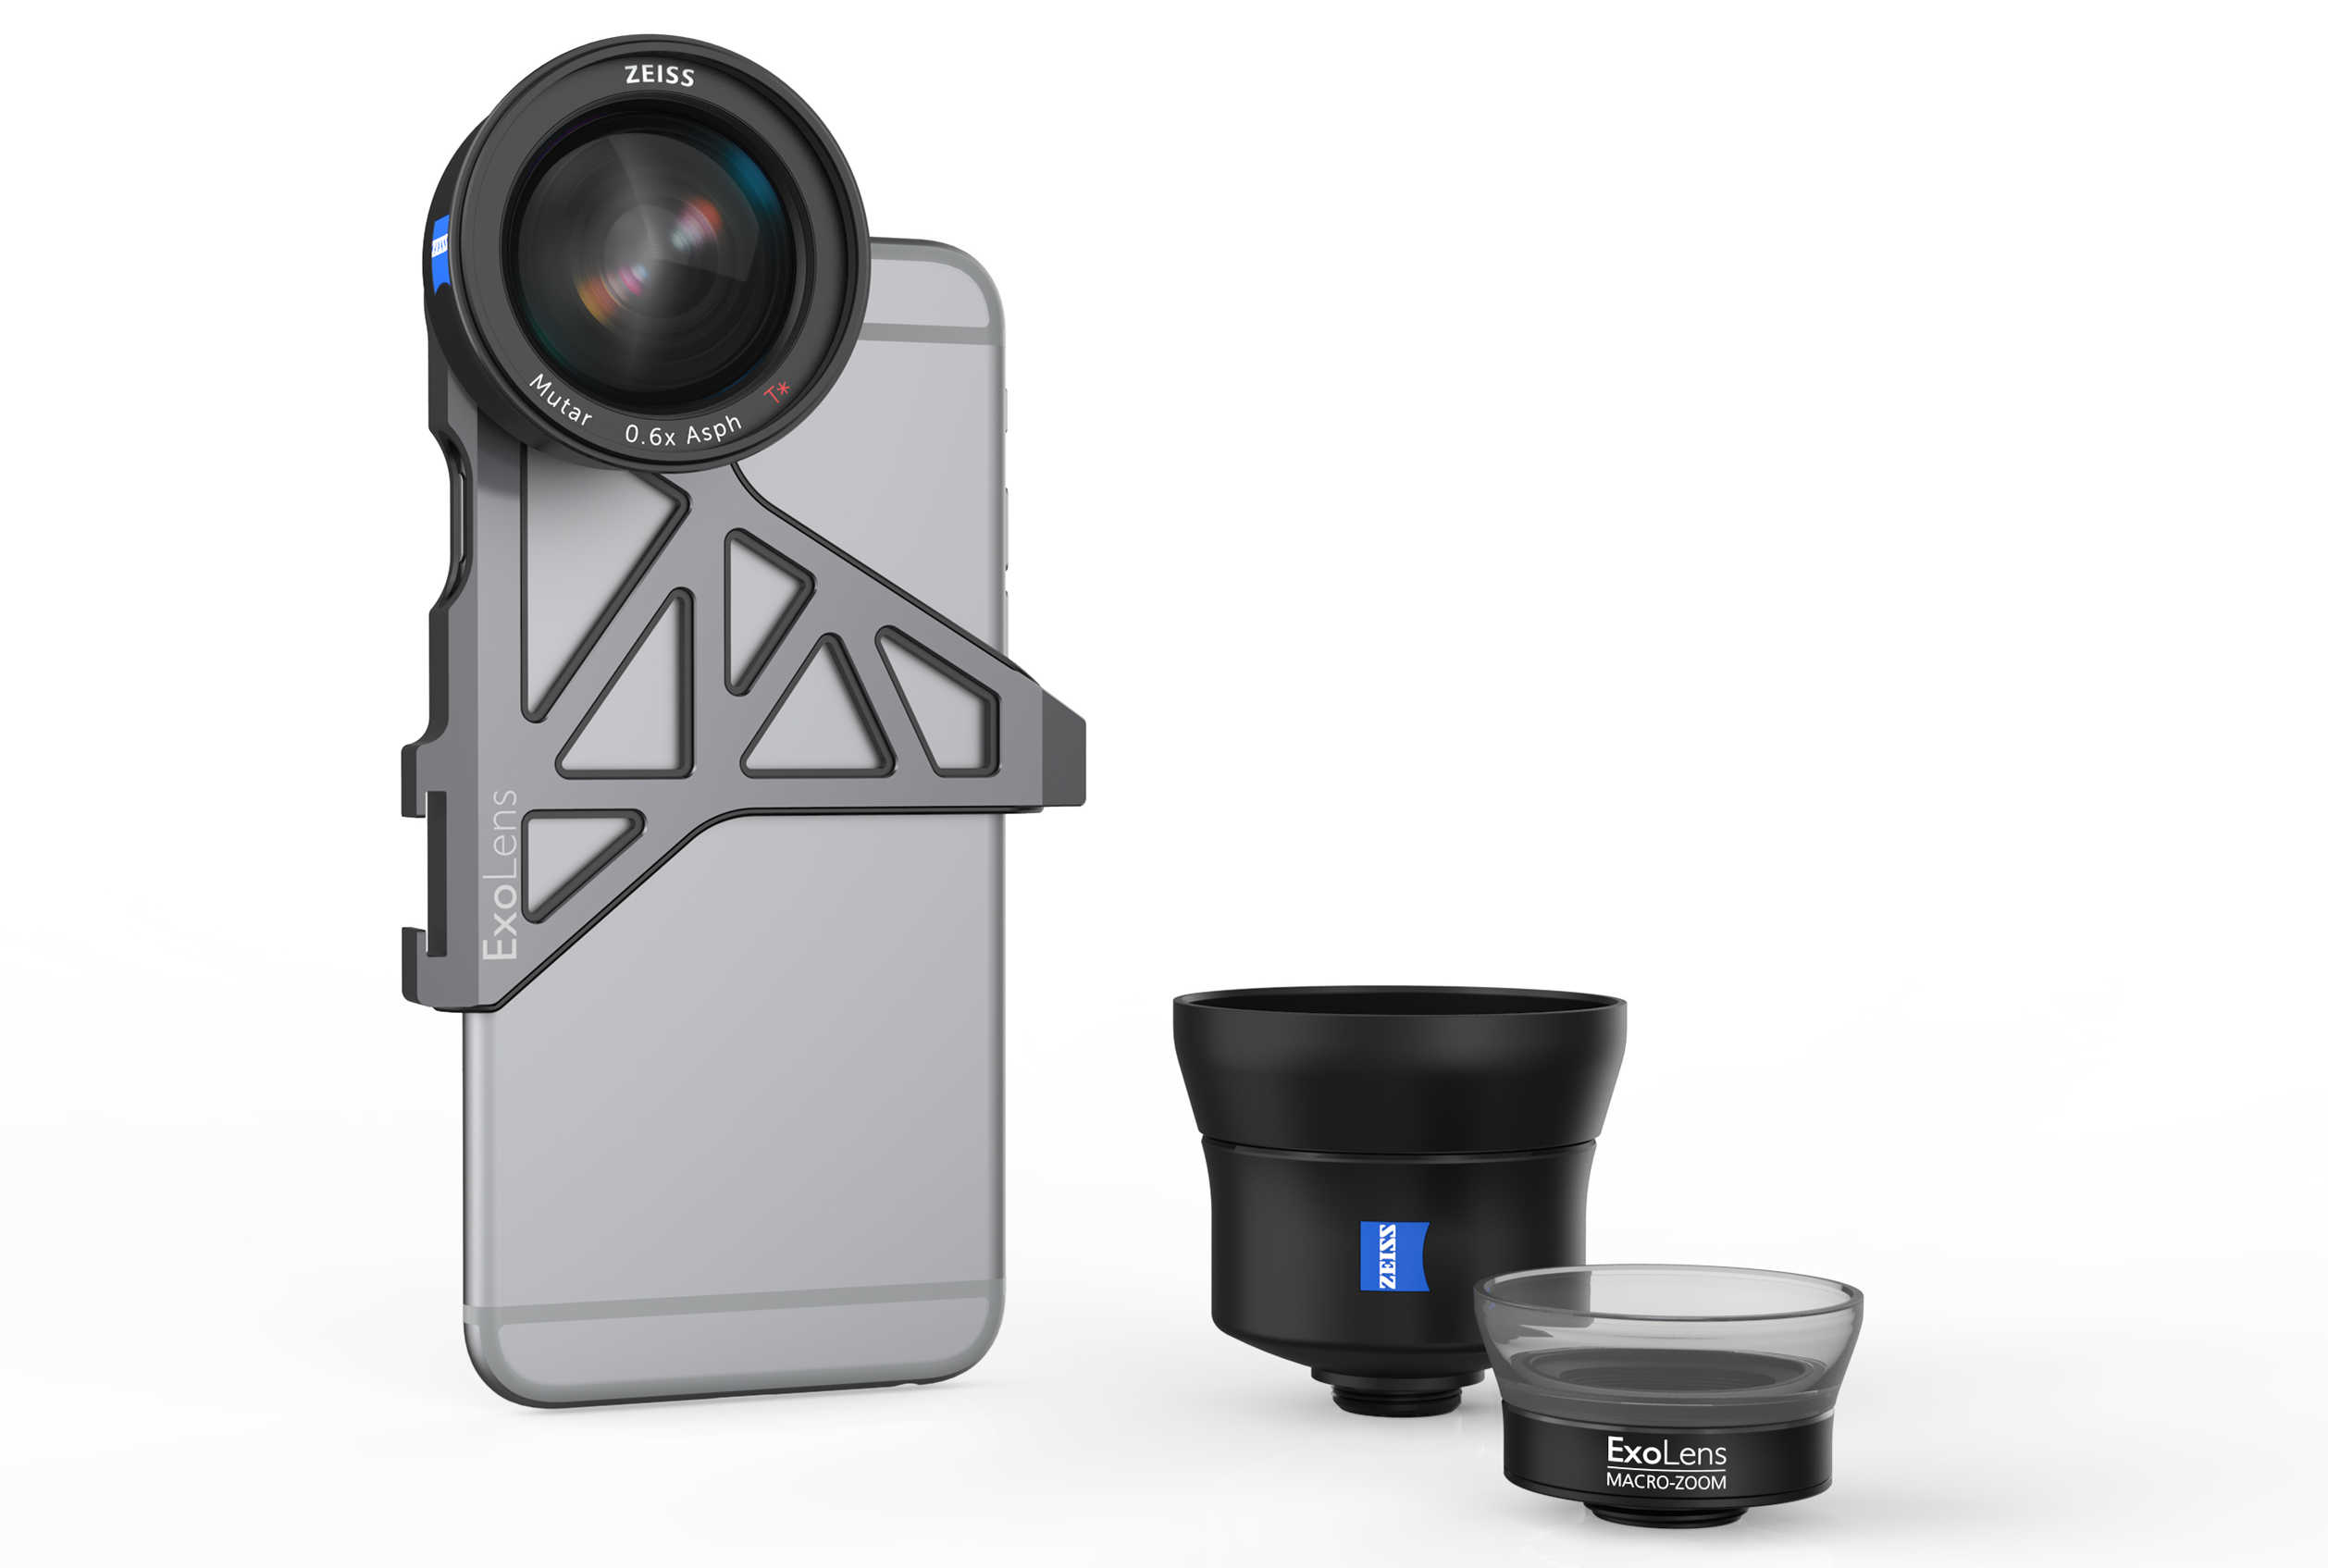 ExoLens, which partnered with ZEISS for a pro line of iPhone lenses last year, will soon offer a protective case for the iPhone 7 to accommodate the lenses.